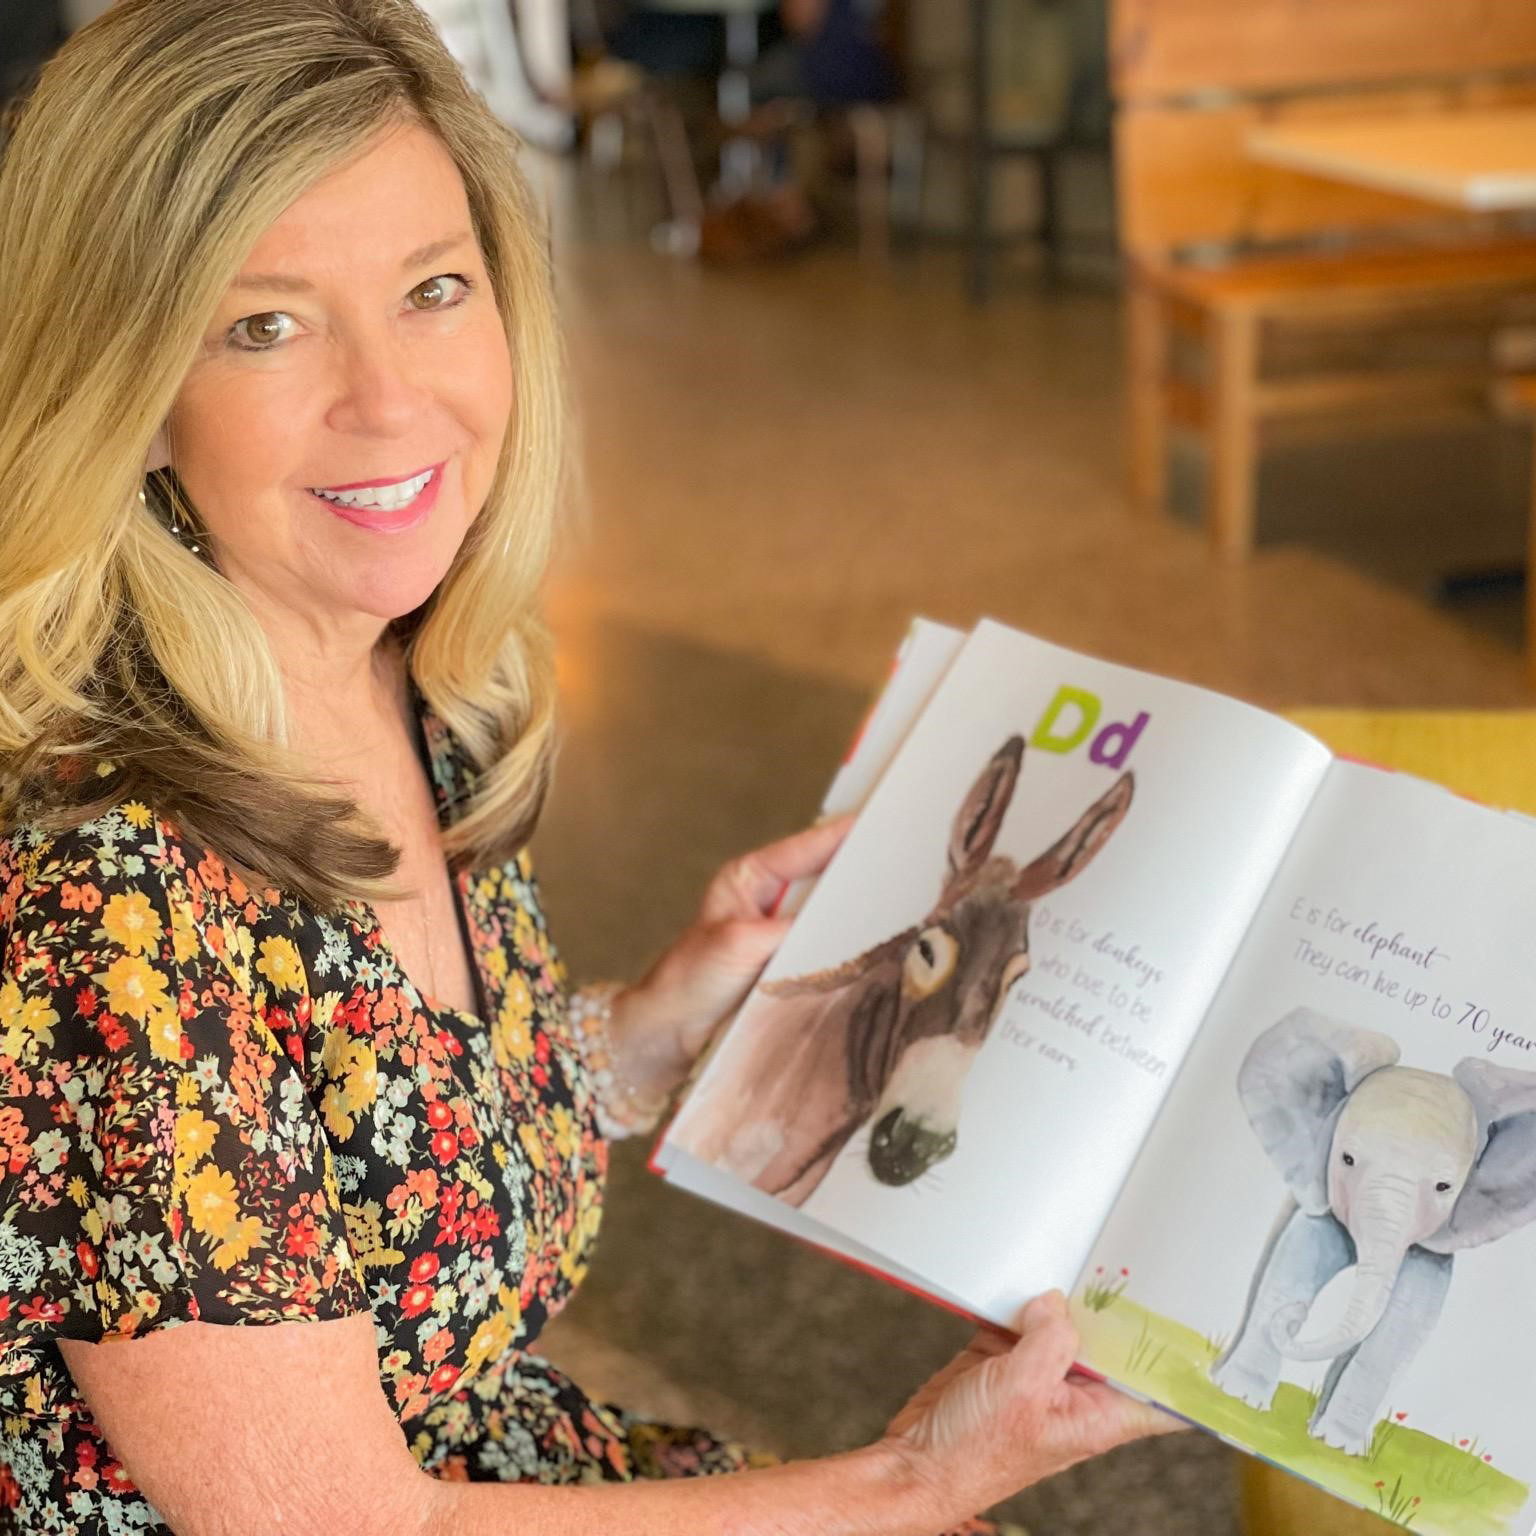 Suzanne Homan authored and illustrated an ABC book for children